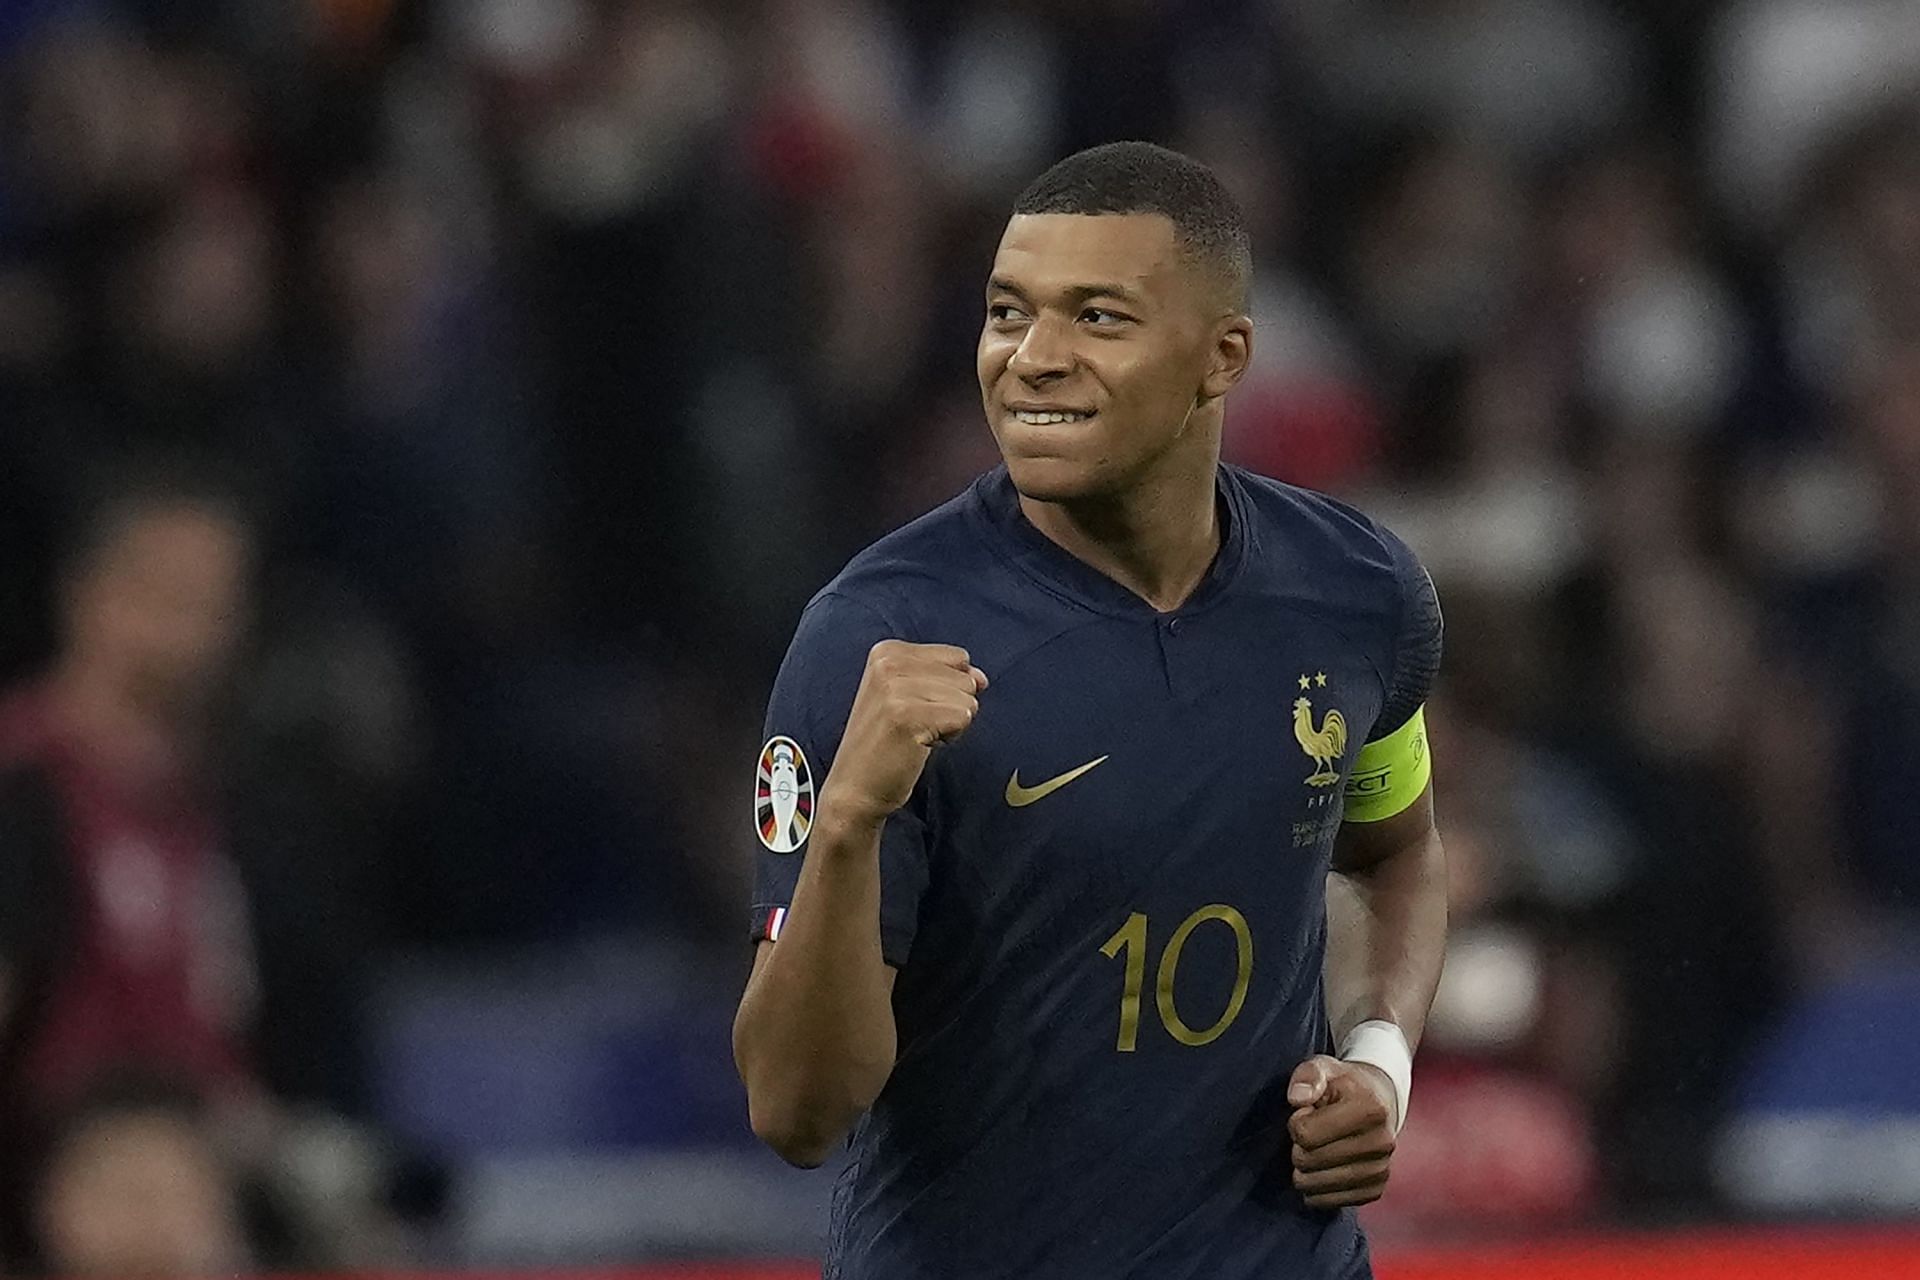 Mbappe faces an uncertain future at the French capital.